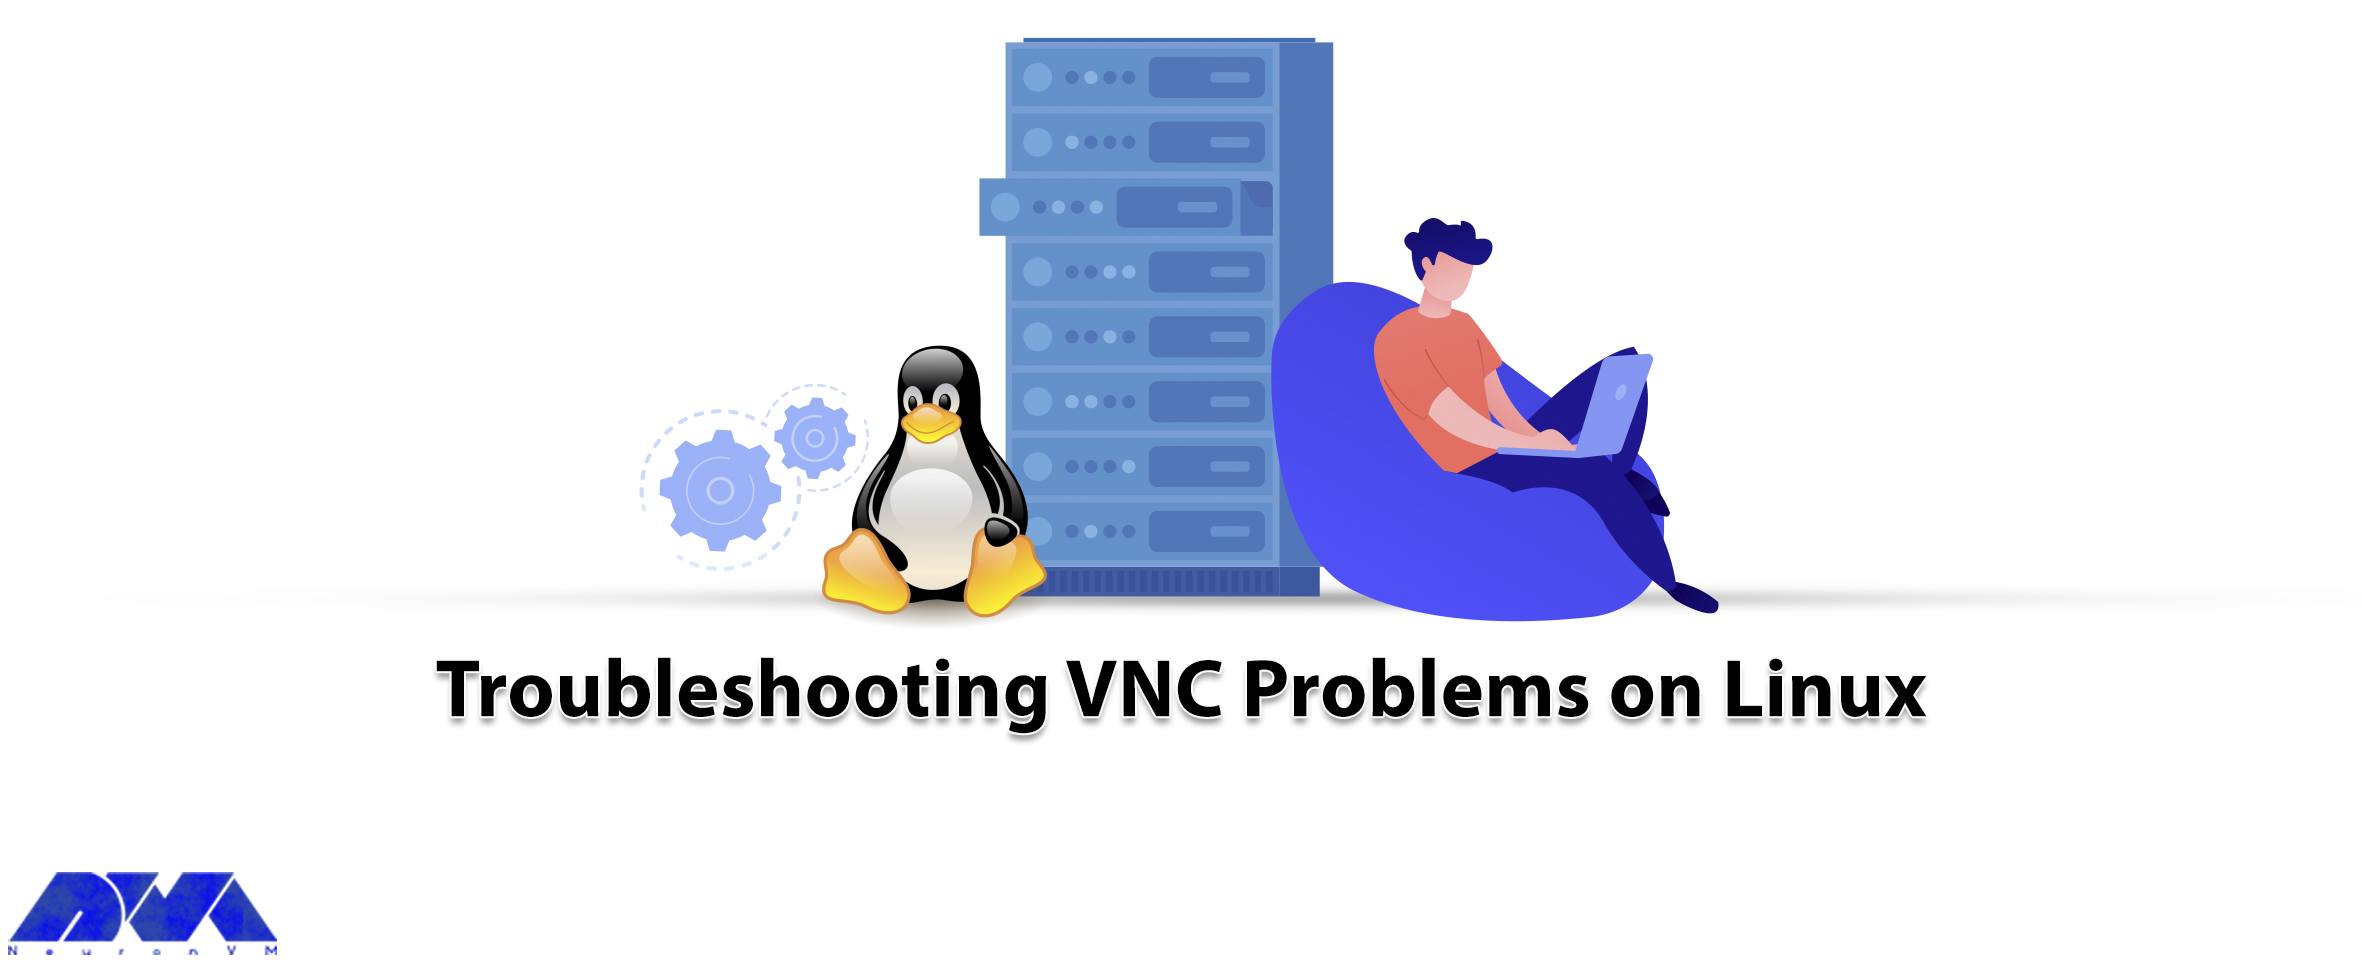 Troubleshooting VNC Problems on Linux - NeuronVM